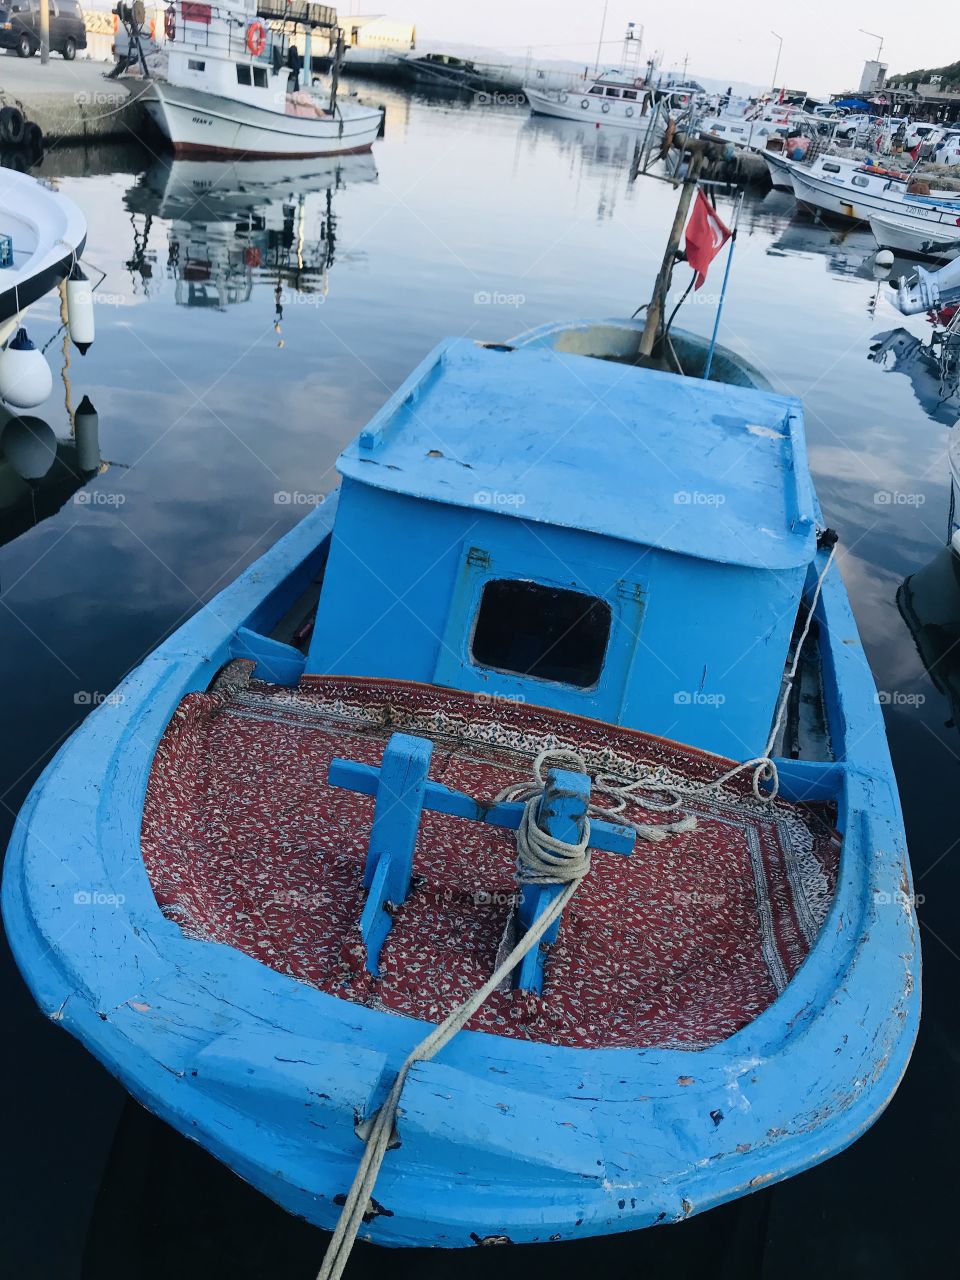 Boats in small seaside Town